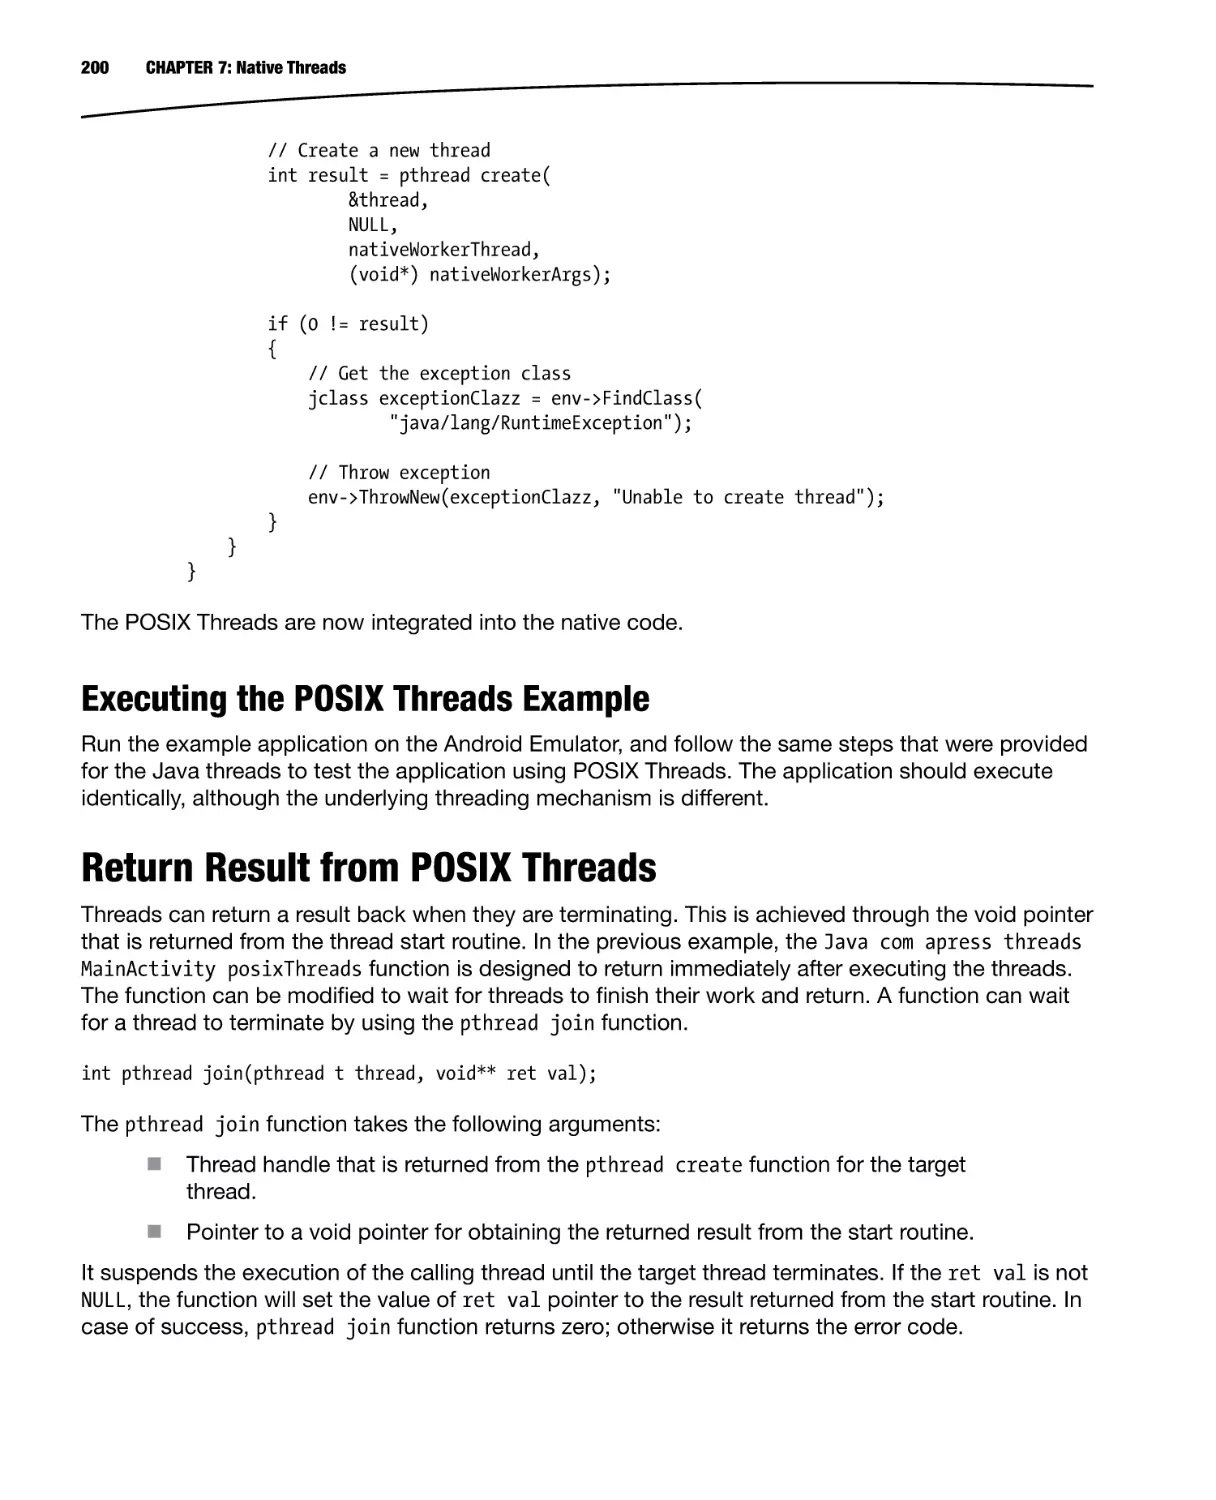 Executing the POSIX Threads Example
Return Result from POSIX Threads